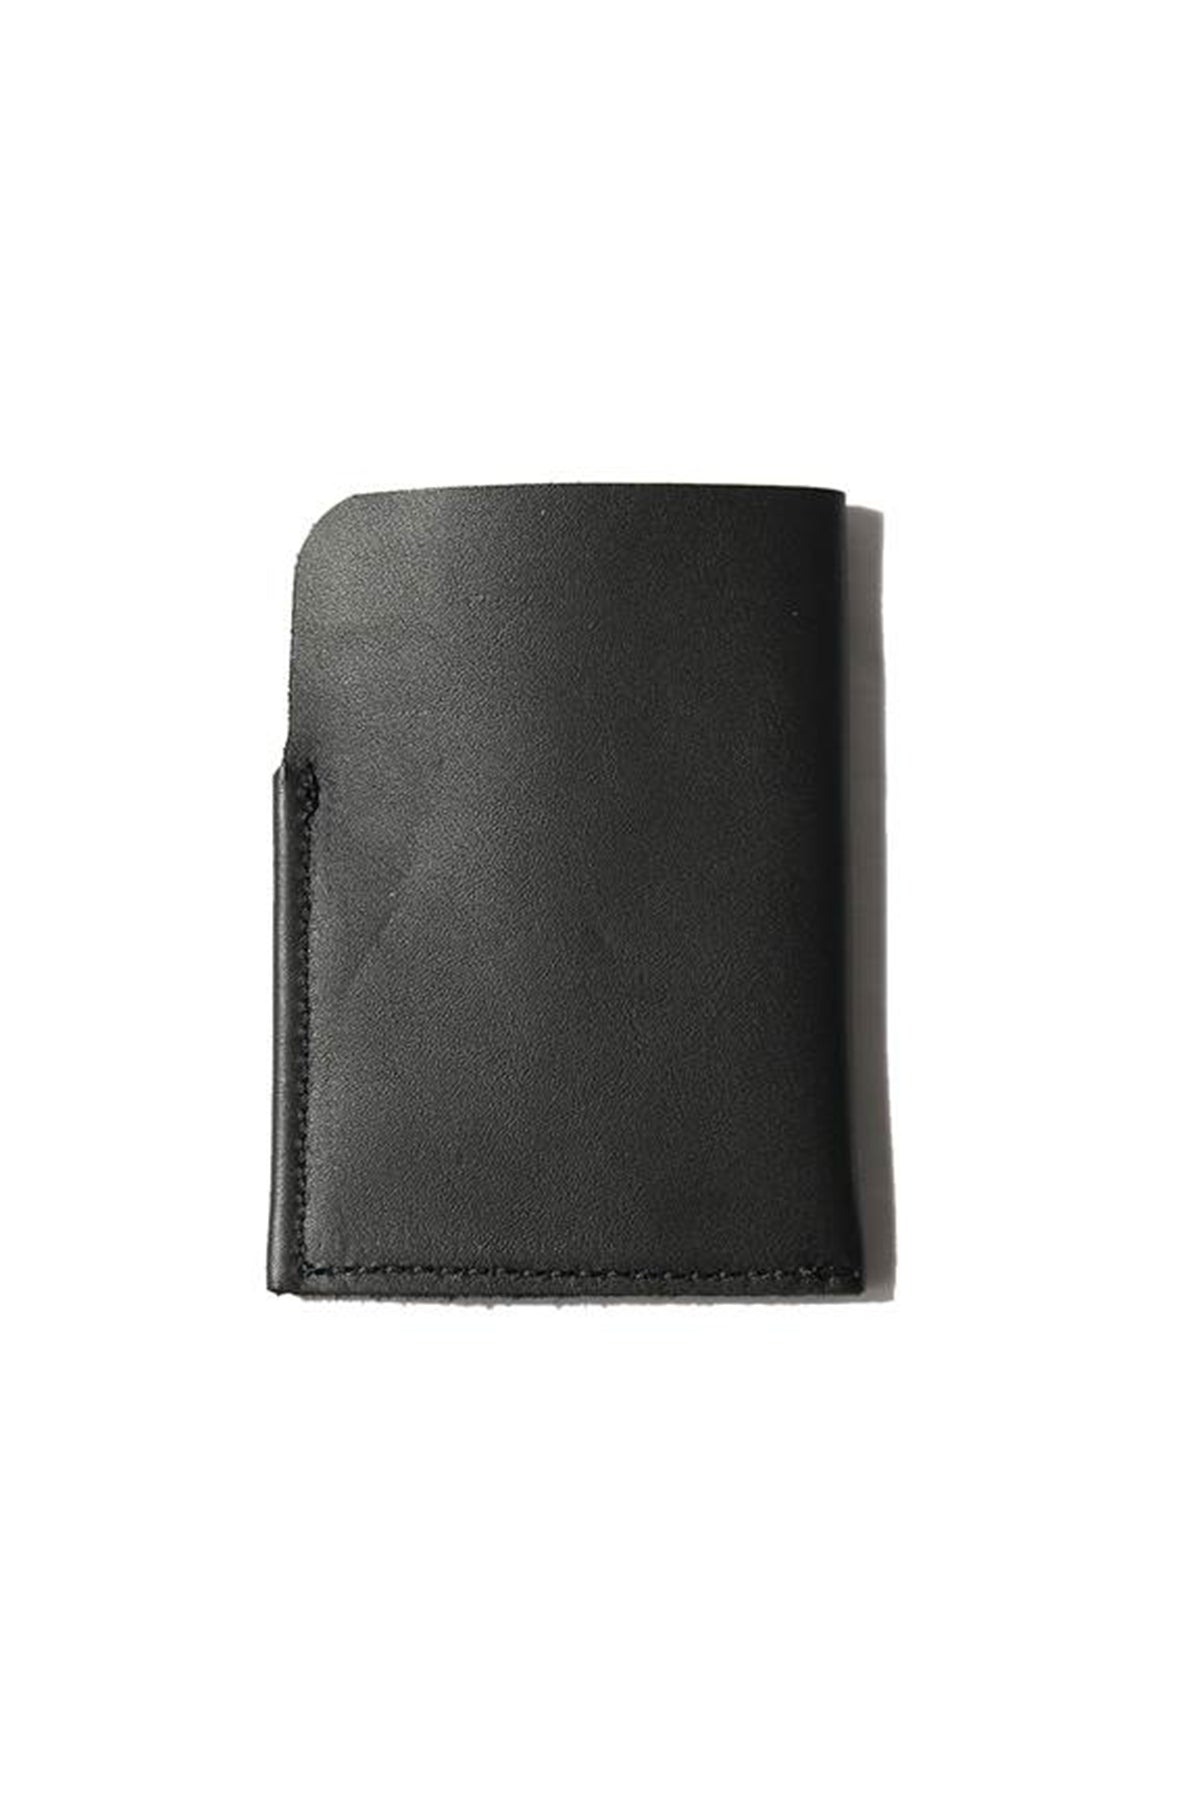 A minimalist SOFT LEATHER CARD HOLDER crafted by local artisans, showcasing the essence of our Lima Sagrada brand.-600106598481